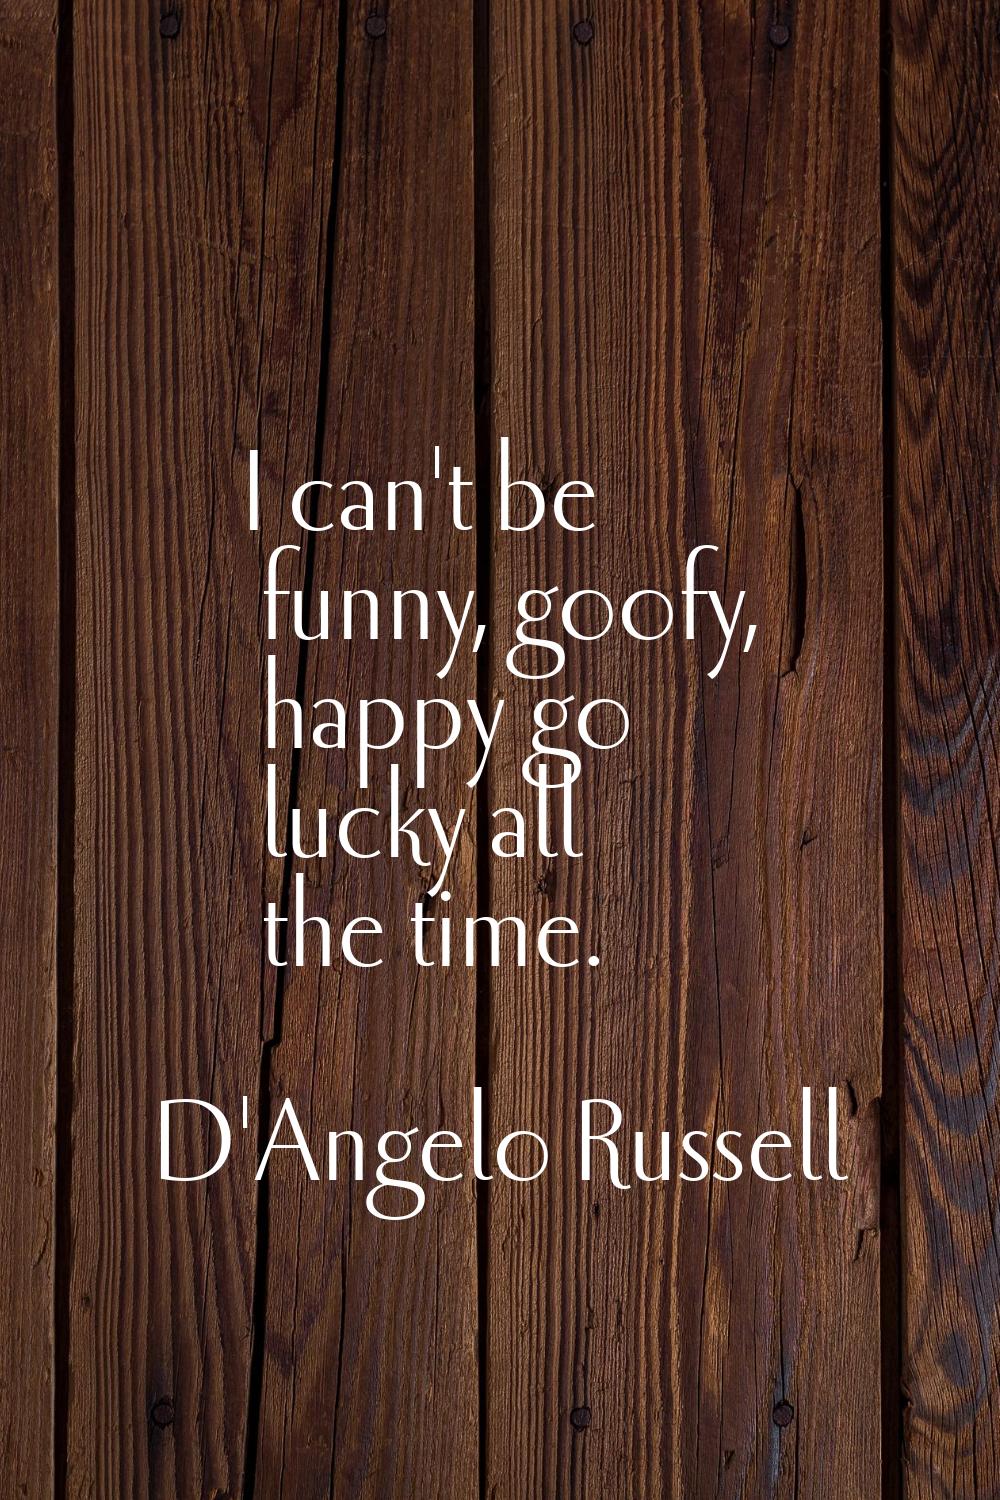 I can't be funny, goofy, happy go lucky all the time.